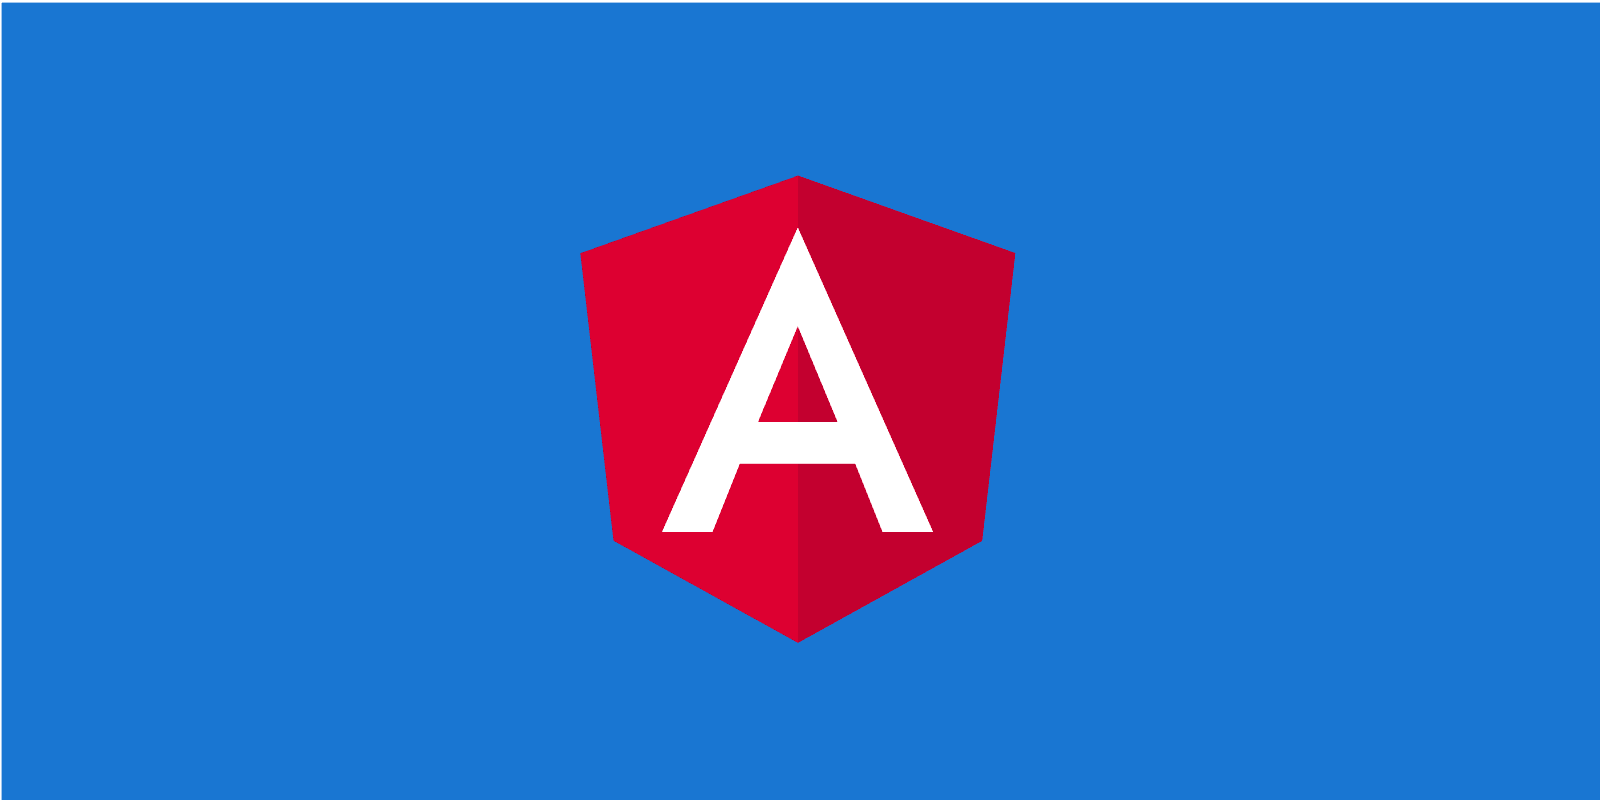 Introduction to forms in Angular